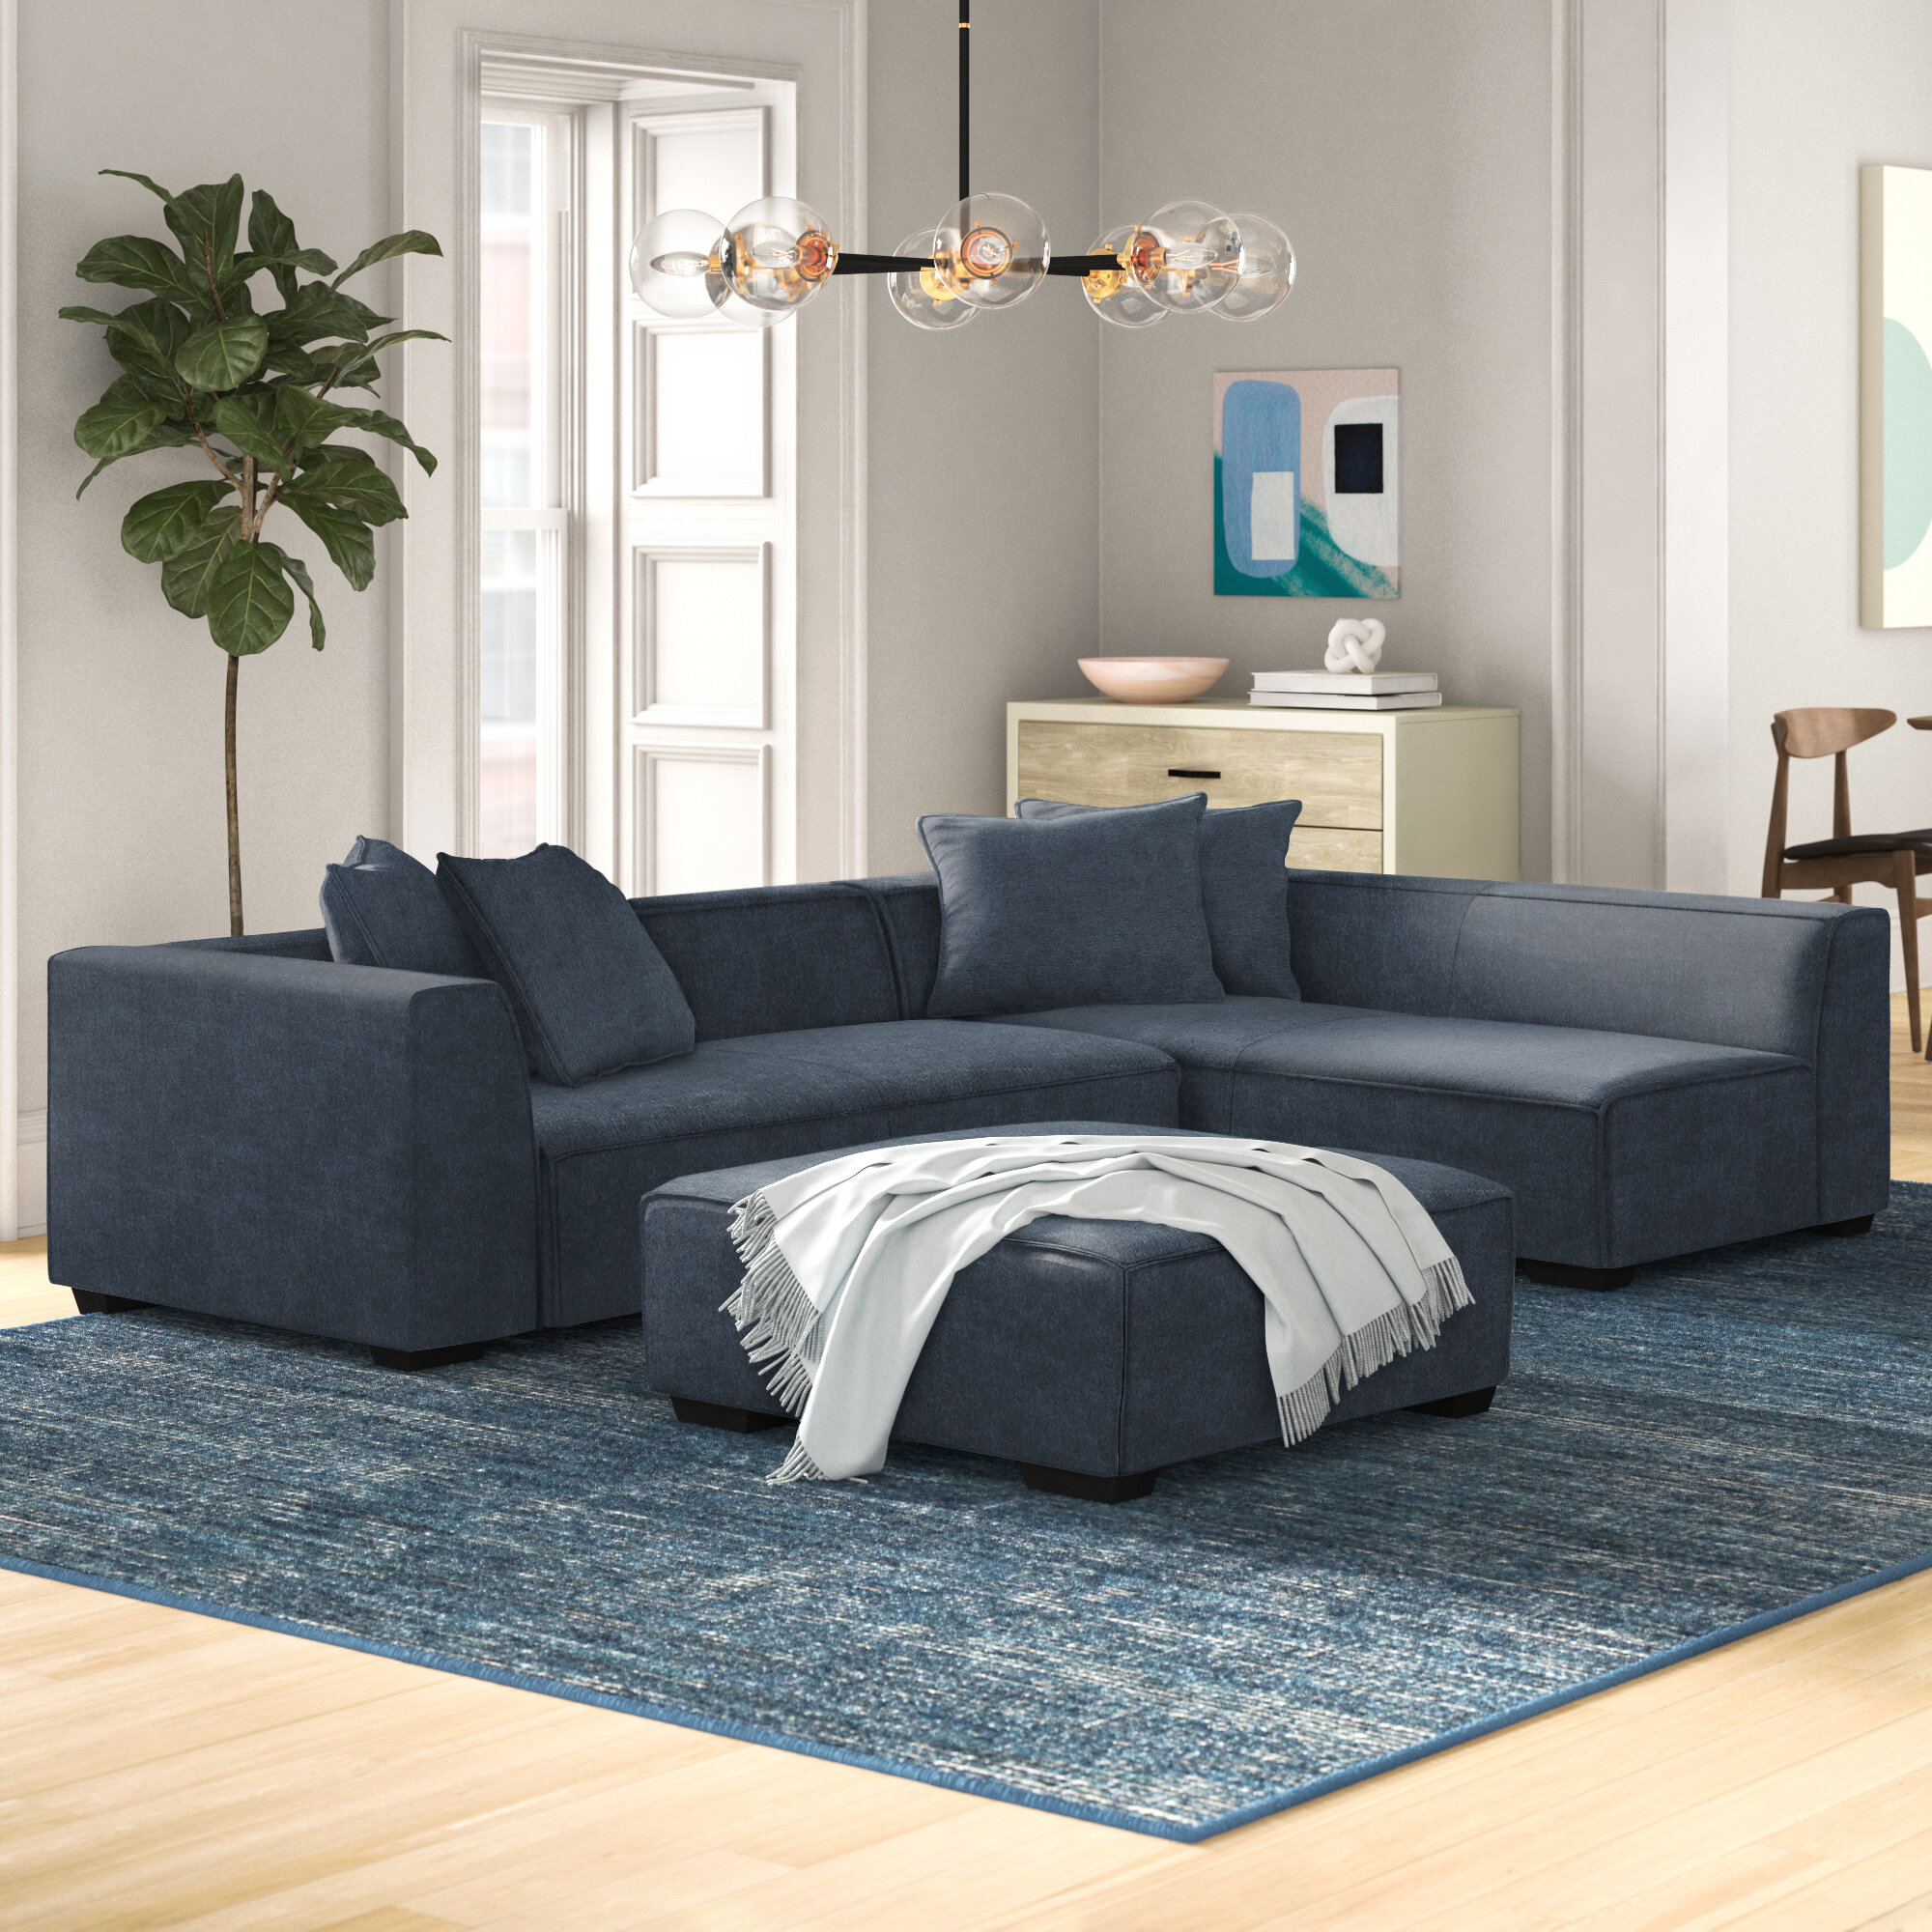 Easton 97.5" Wide Right Hand Facing Corner Sectional with Ottoman